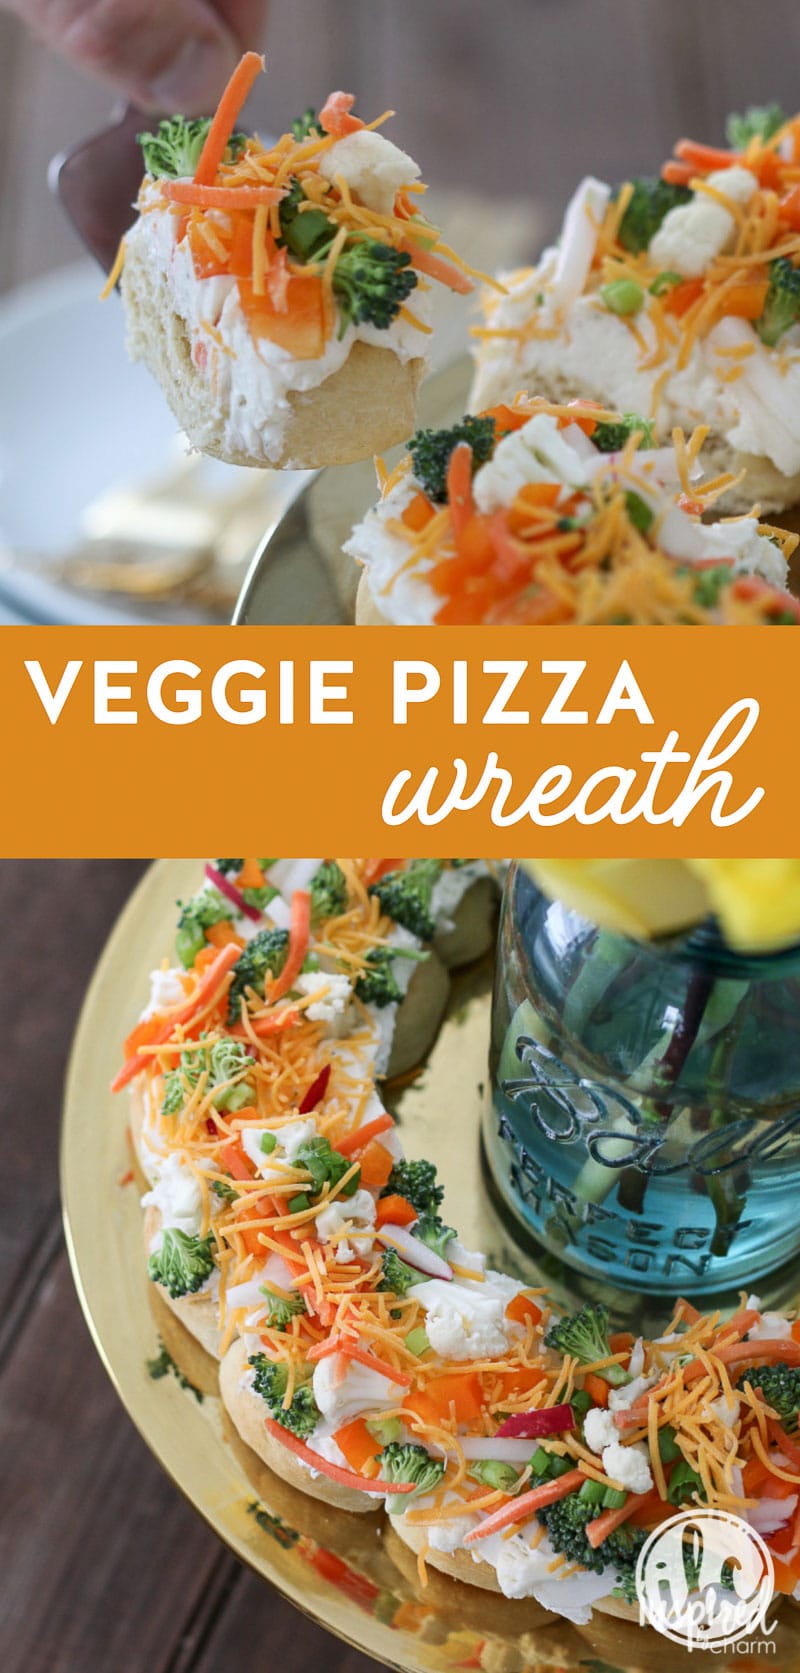 This Veggie Pizza Wreath is an easy and beautiful #appetizer #recipe! #veggie #pizza